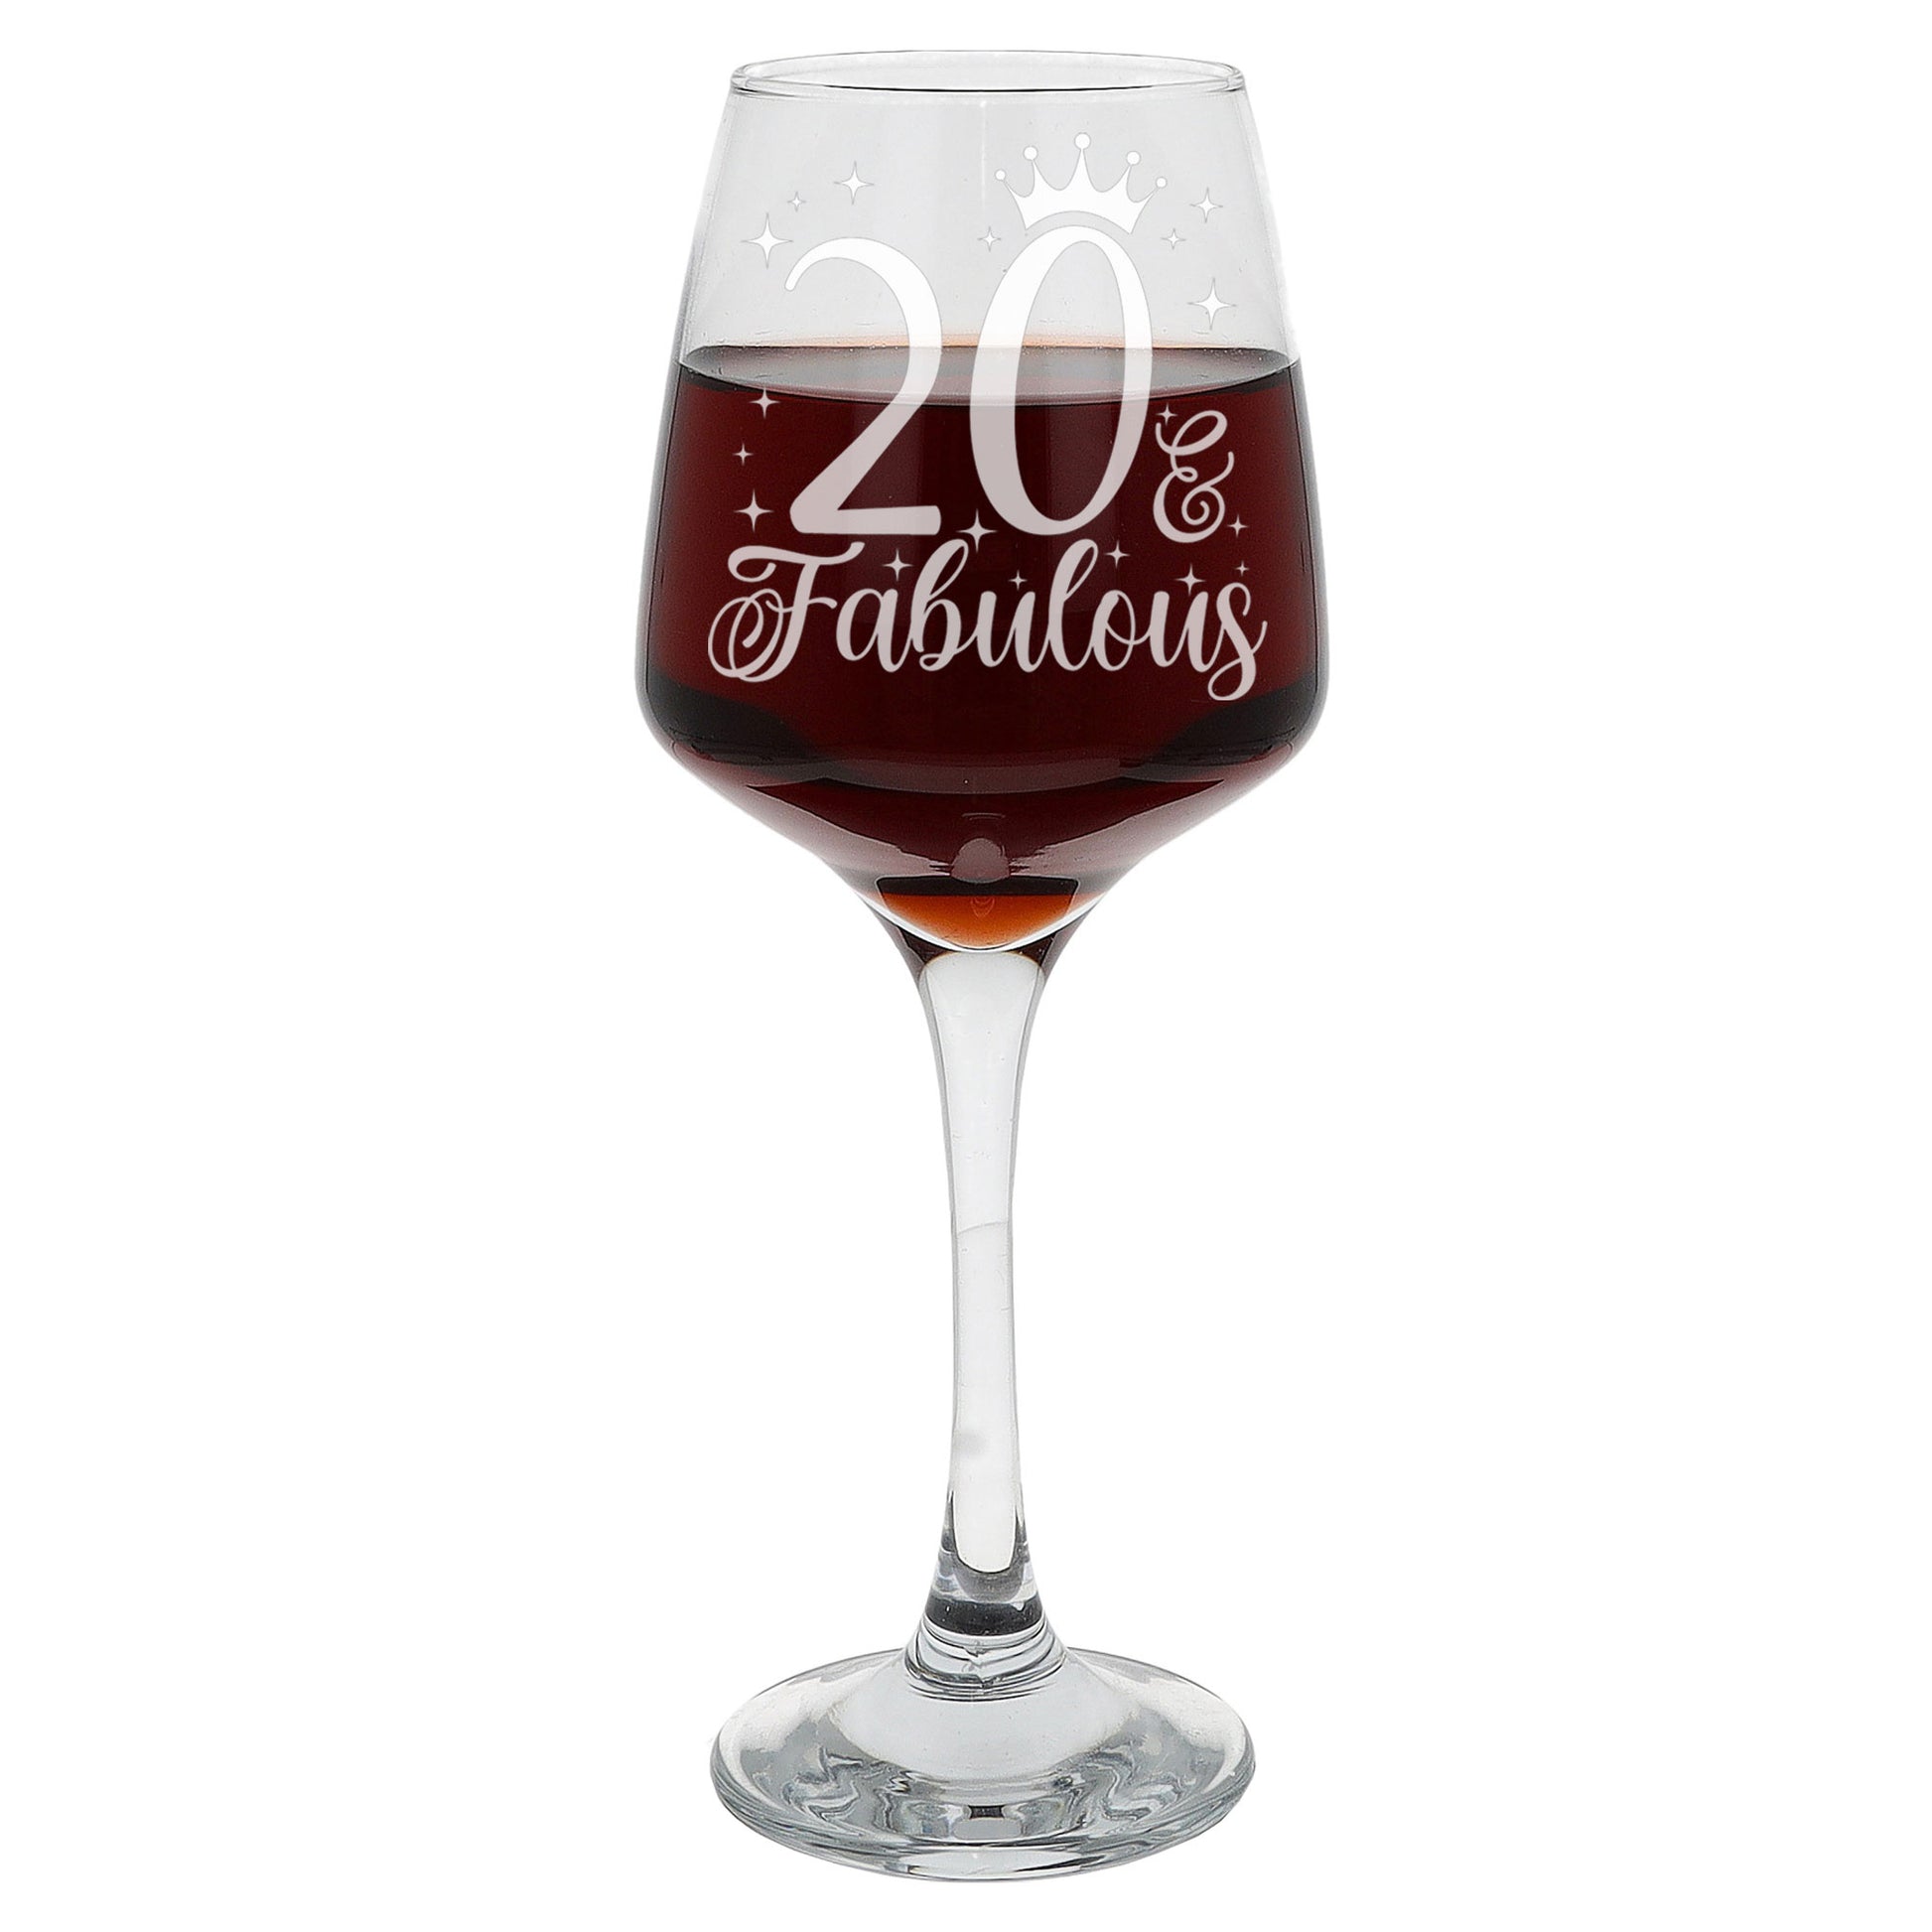 20 & Fabulous 20th Birthday Gift Engraved Wine Glass and/or Coaster Set  - Always Looking Good -   